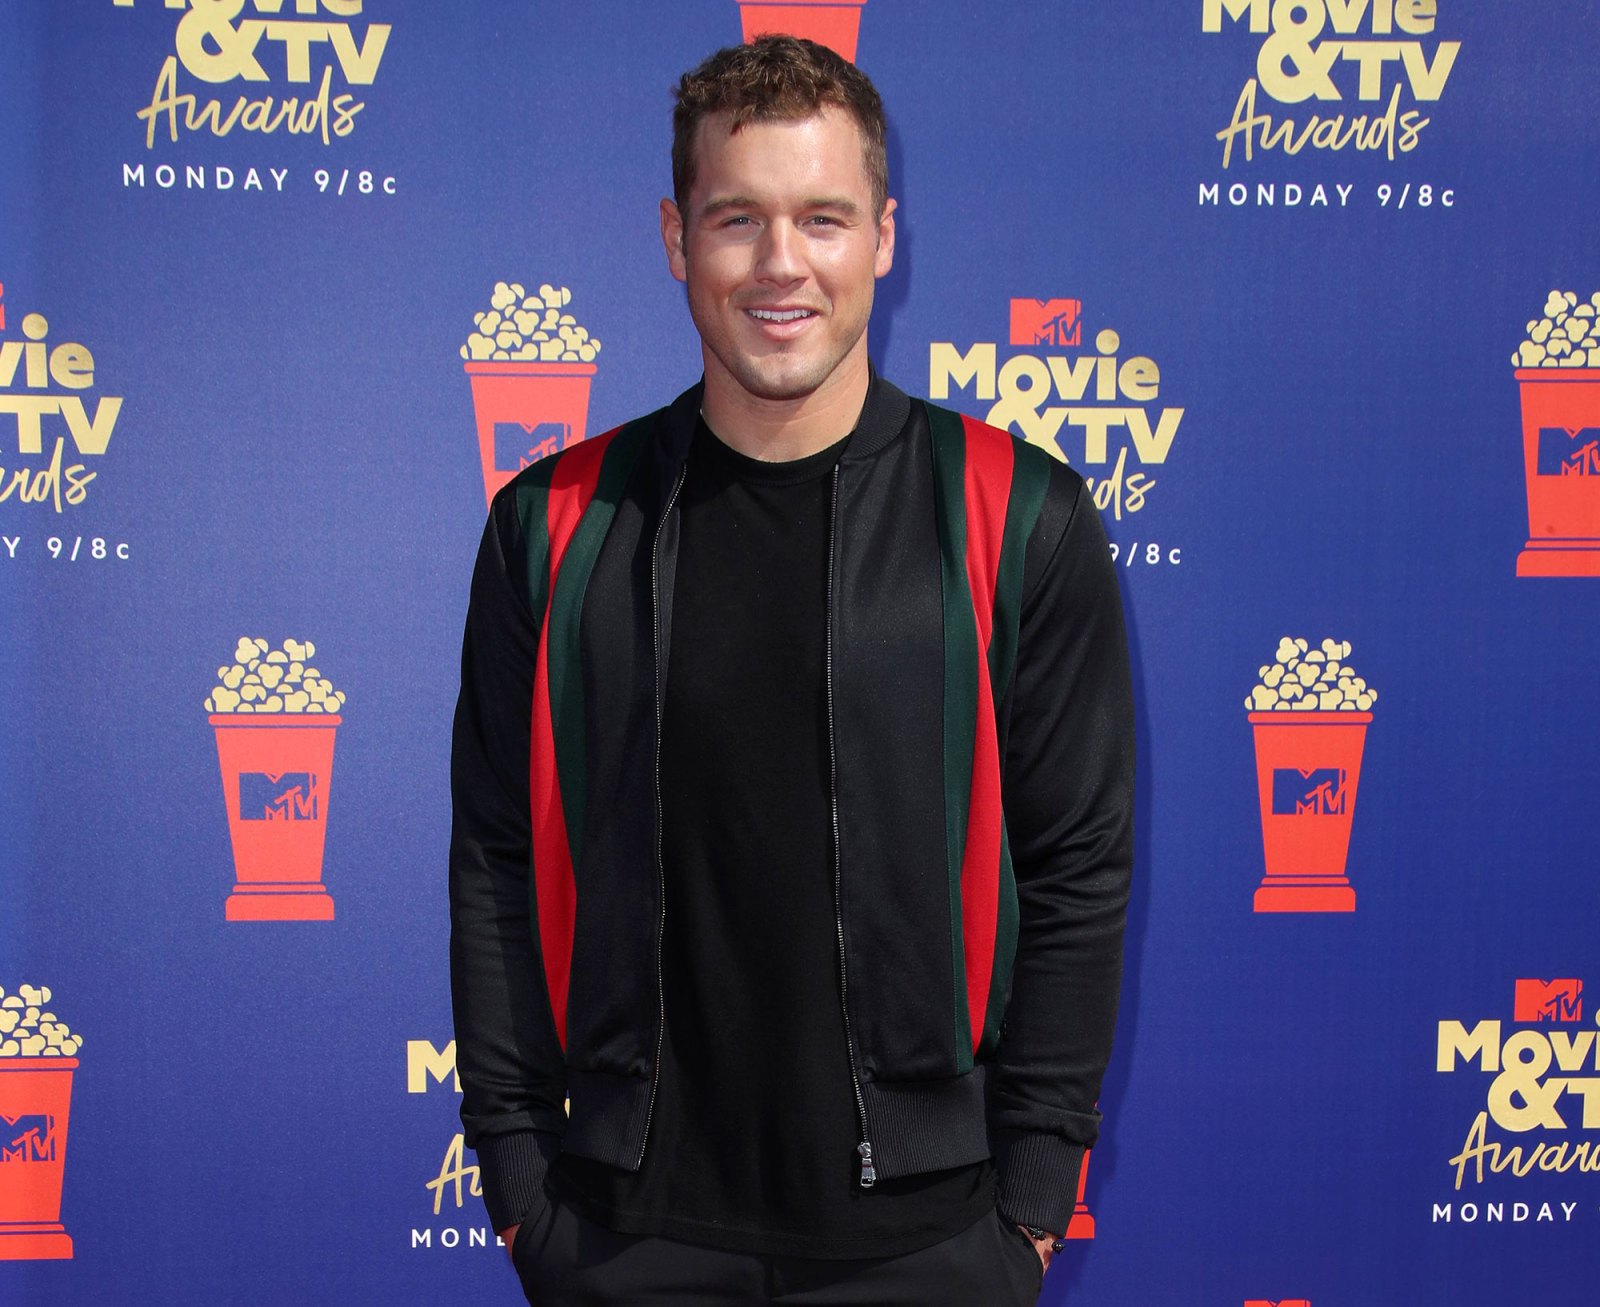 Bachelor Nation Rallies Around Colton Underwood After Coming Out